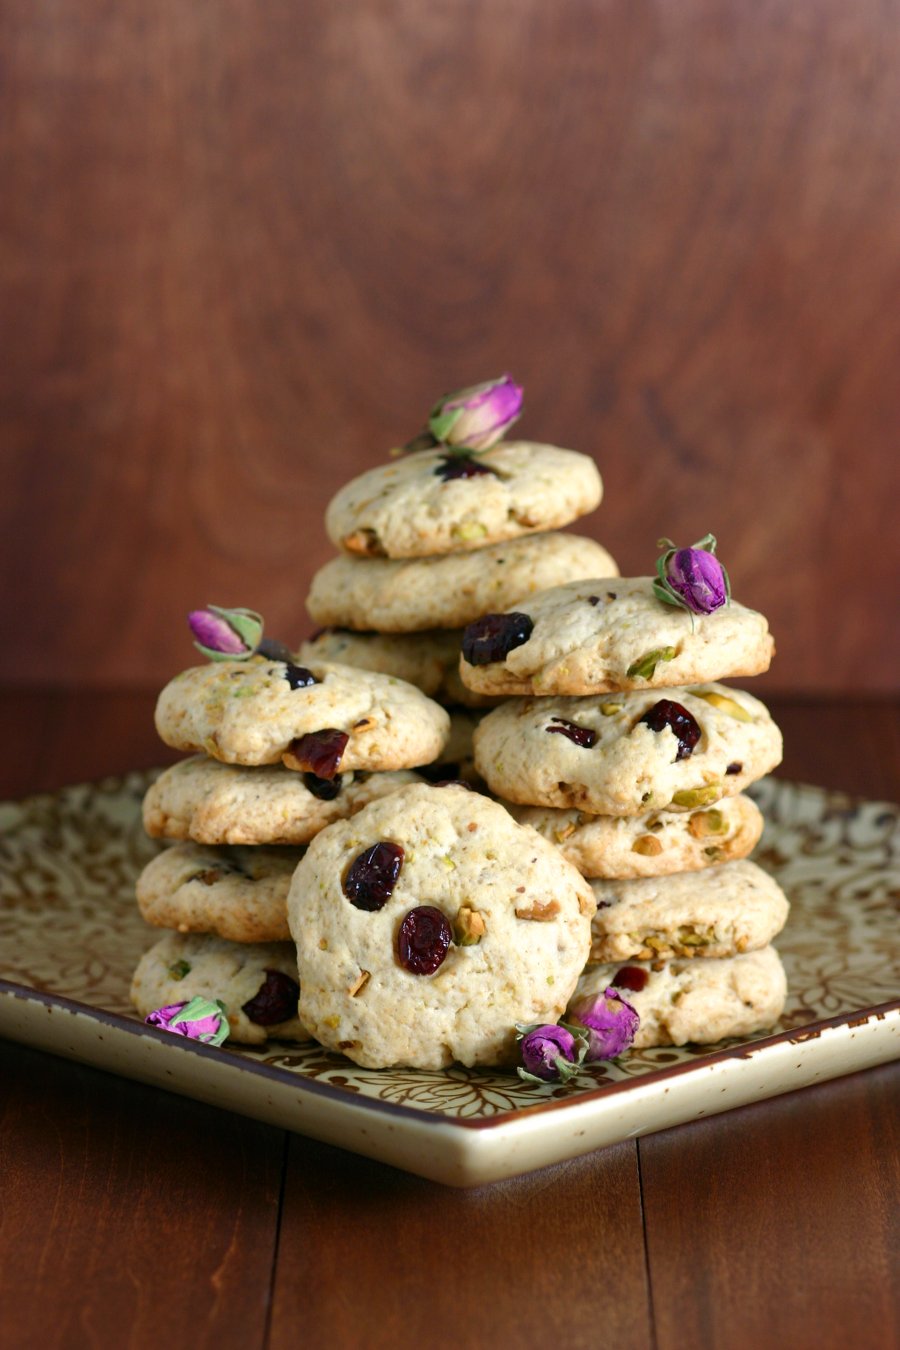 Crisp and crumbly, these Pistachio, Cranberry, and Rosewater Cookies are lightly sweetened and have a dreamy, subtle floral note.